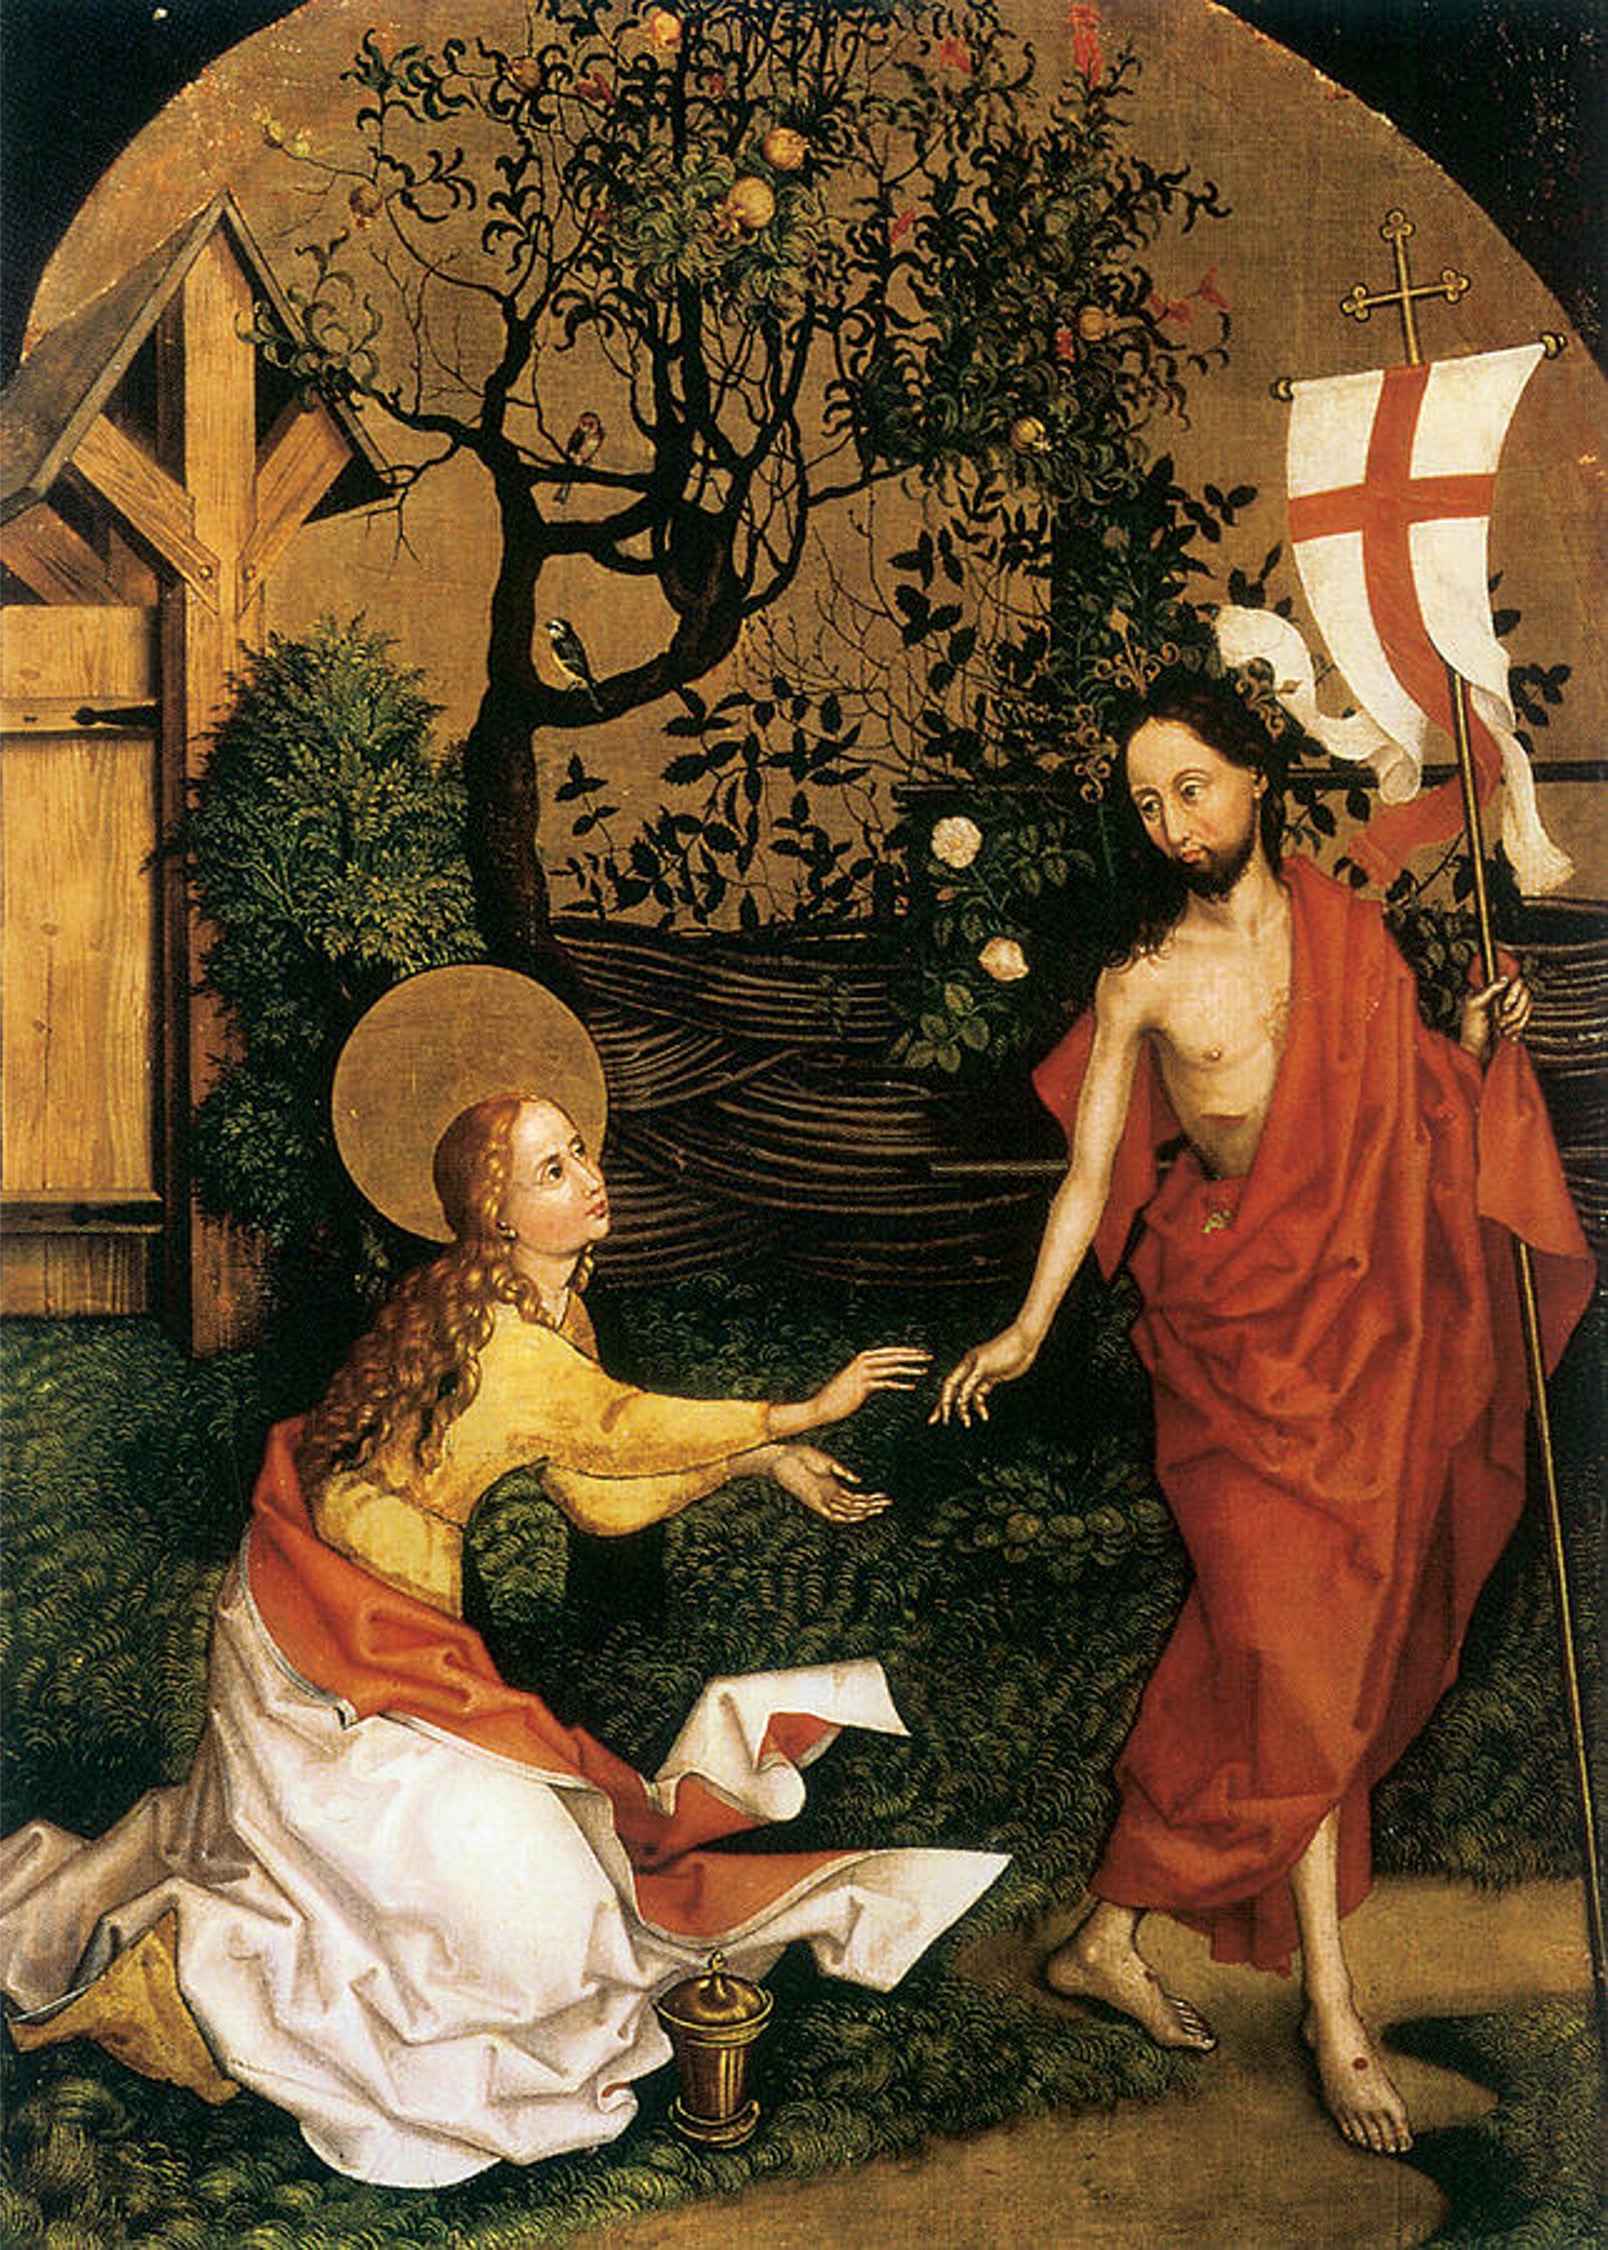 Painting showing Mary Magdalene reaching out for Jesus. 